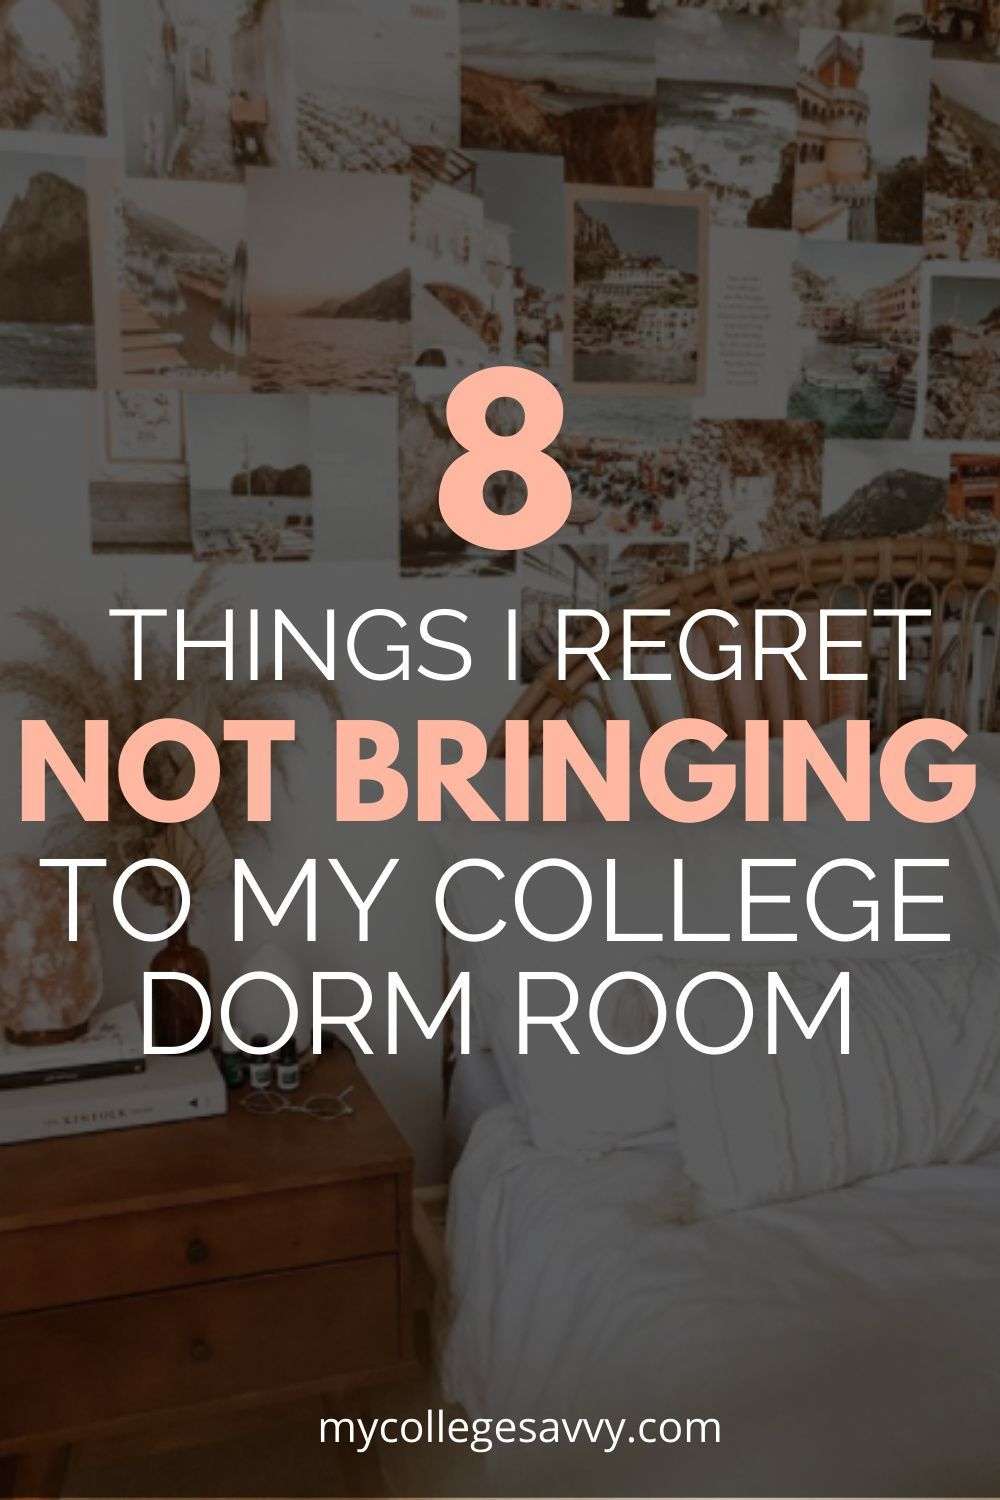 8 Things I Wish I Brought to College